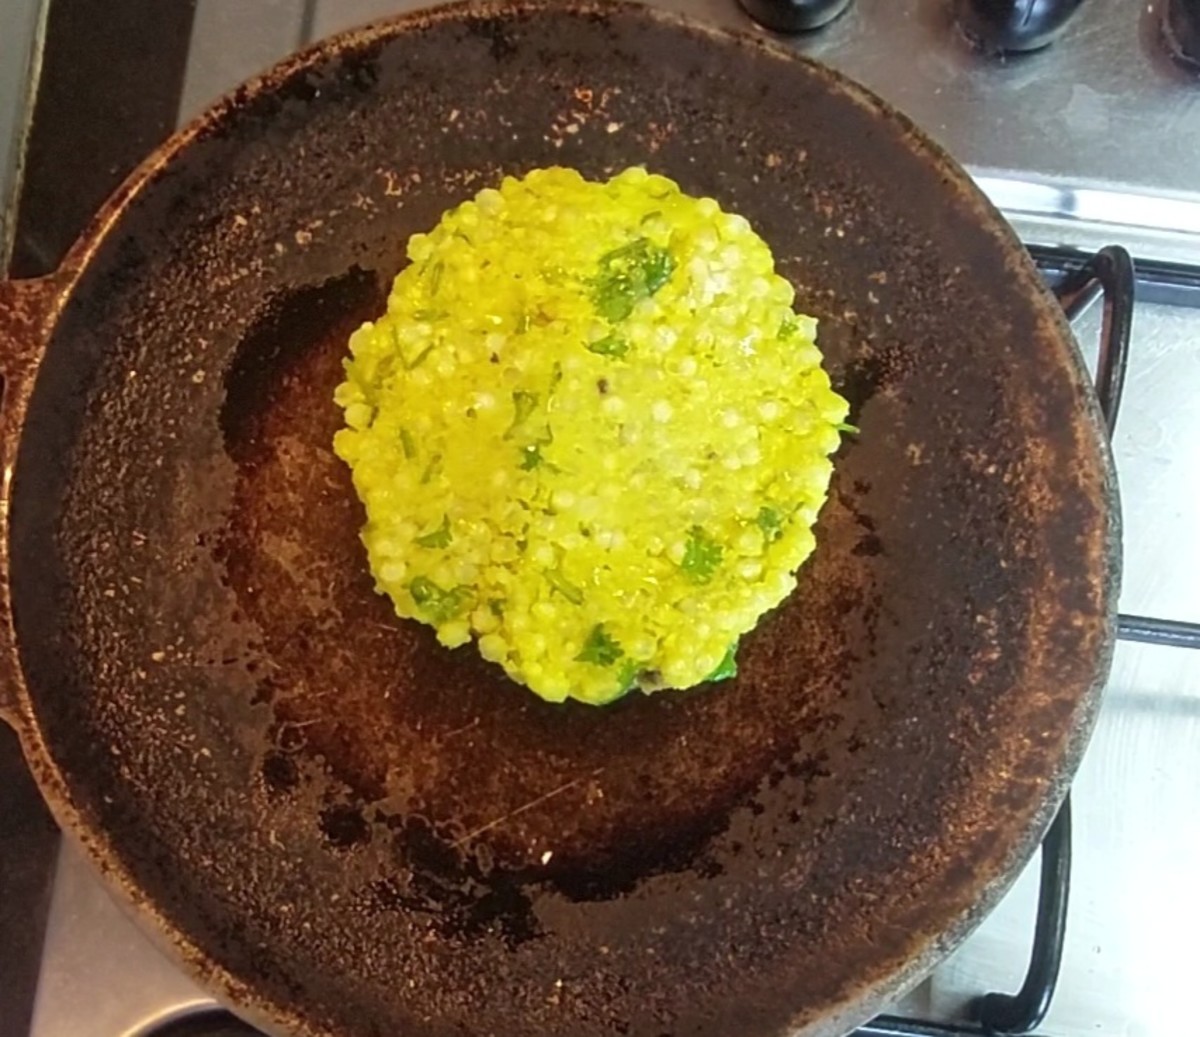 Heat a tawa on medium flame. Drizzle a few drops of ghee over the tawa, drop roti on the tawa and lift butter paper gently to remove it. Cook for a minute.